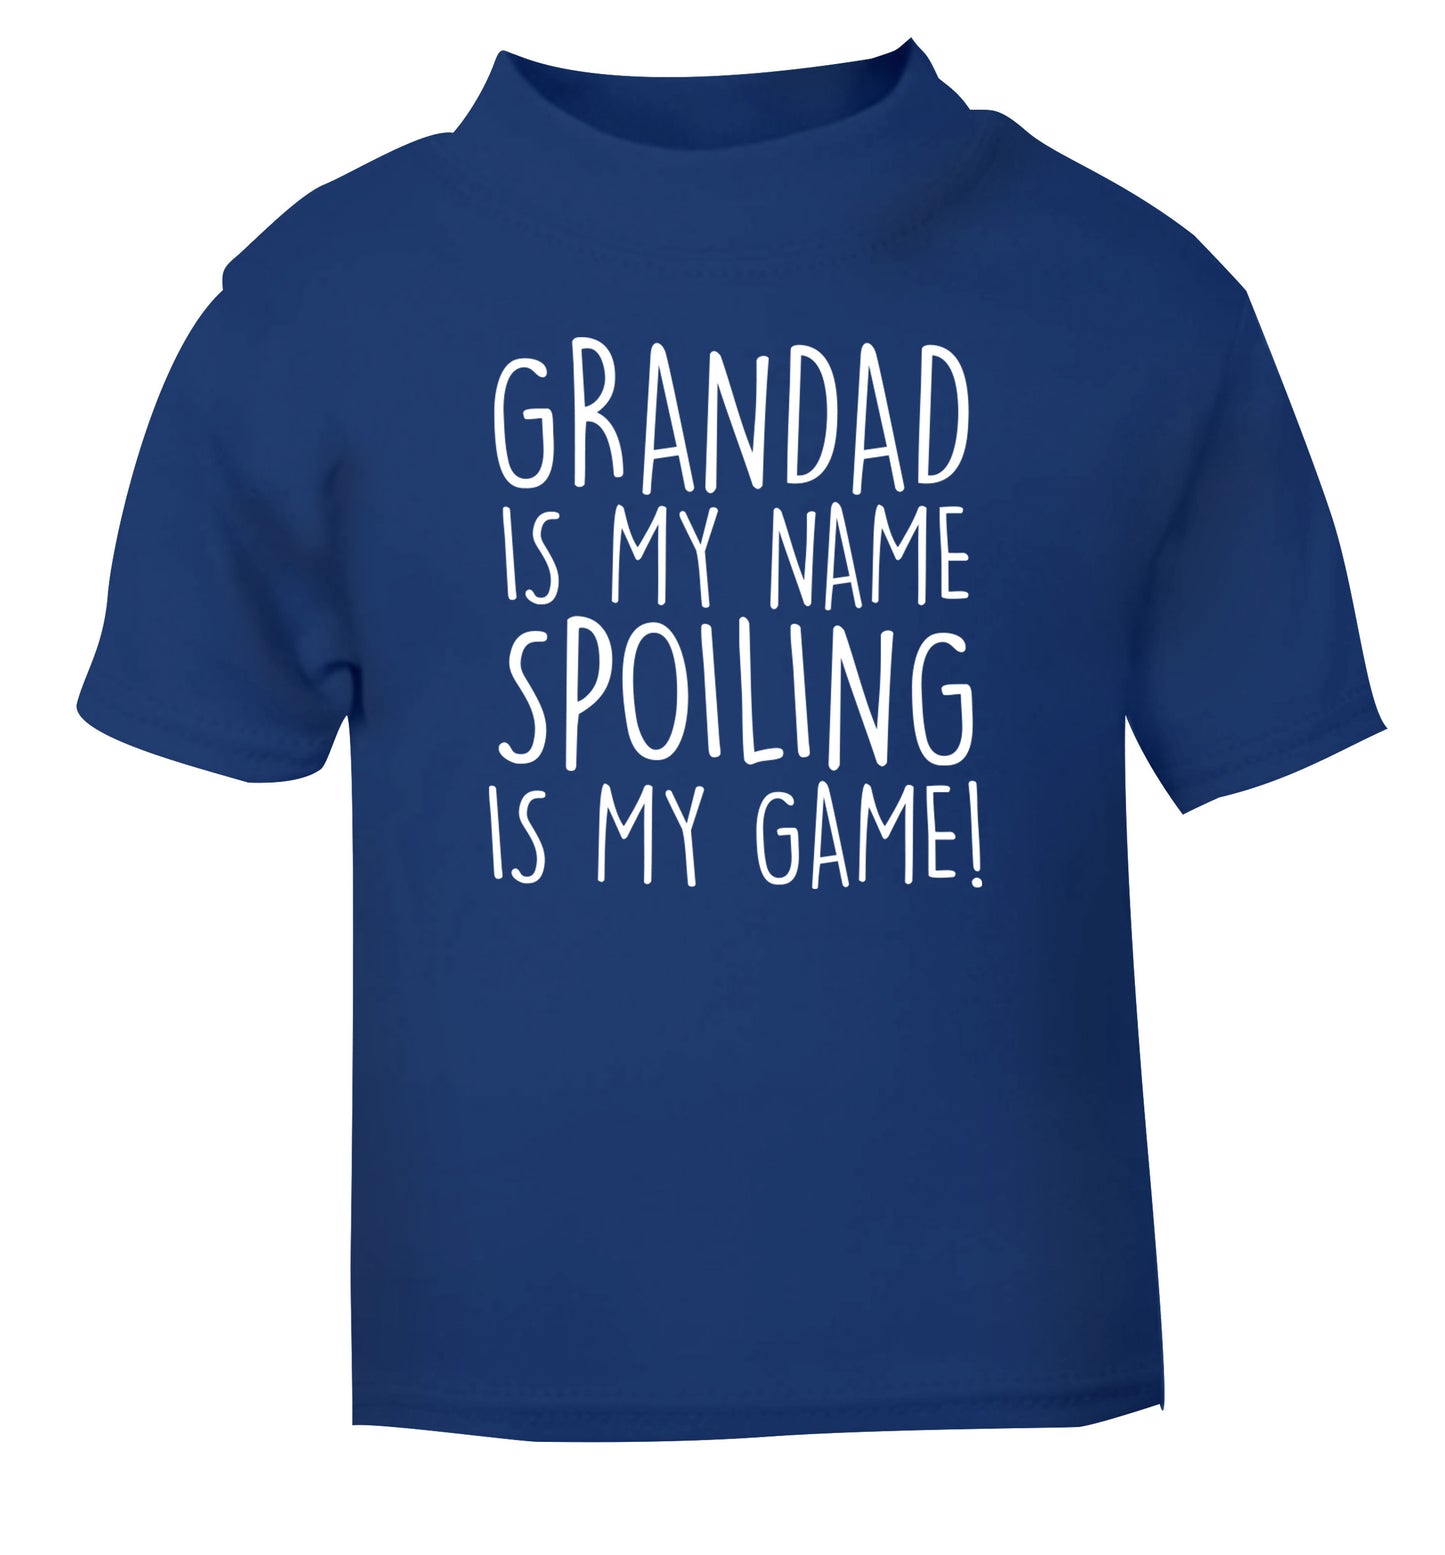 Grandad is my name, spoiling is my game blue Baby Toddler Tshirt 2 Years